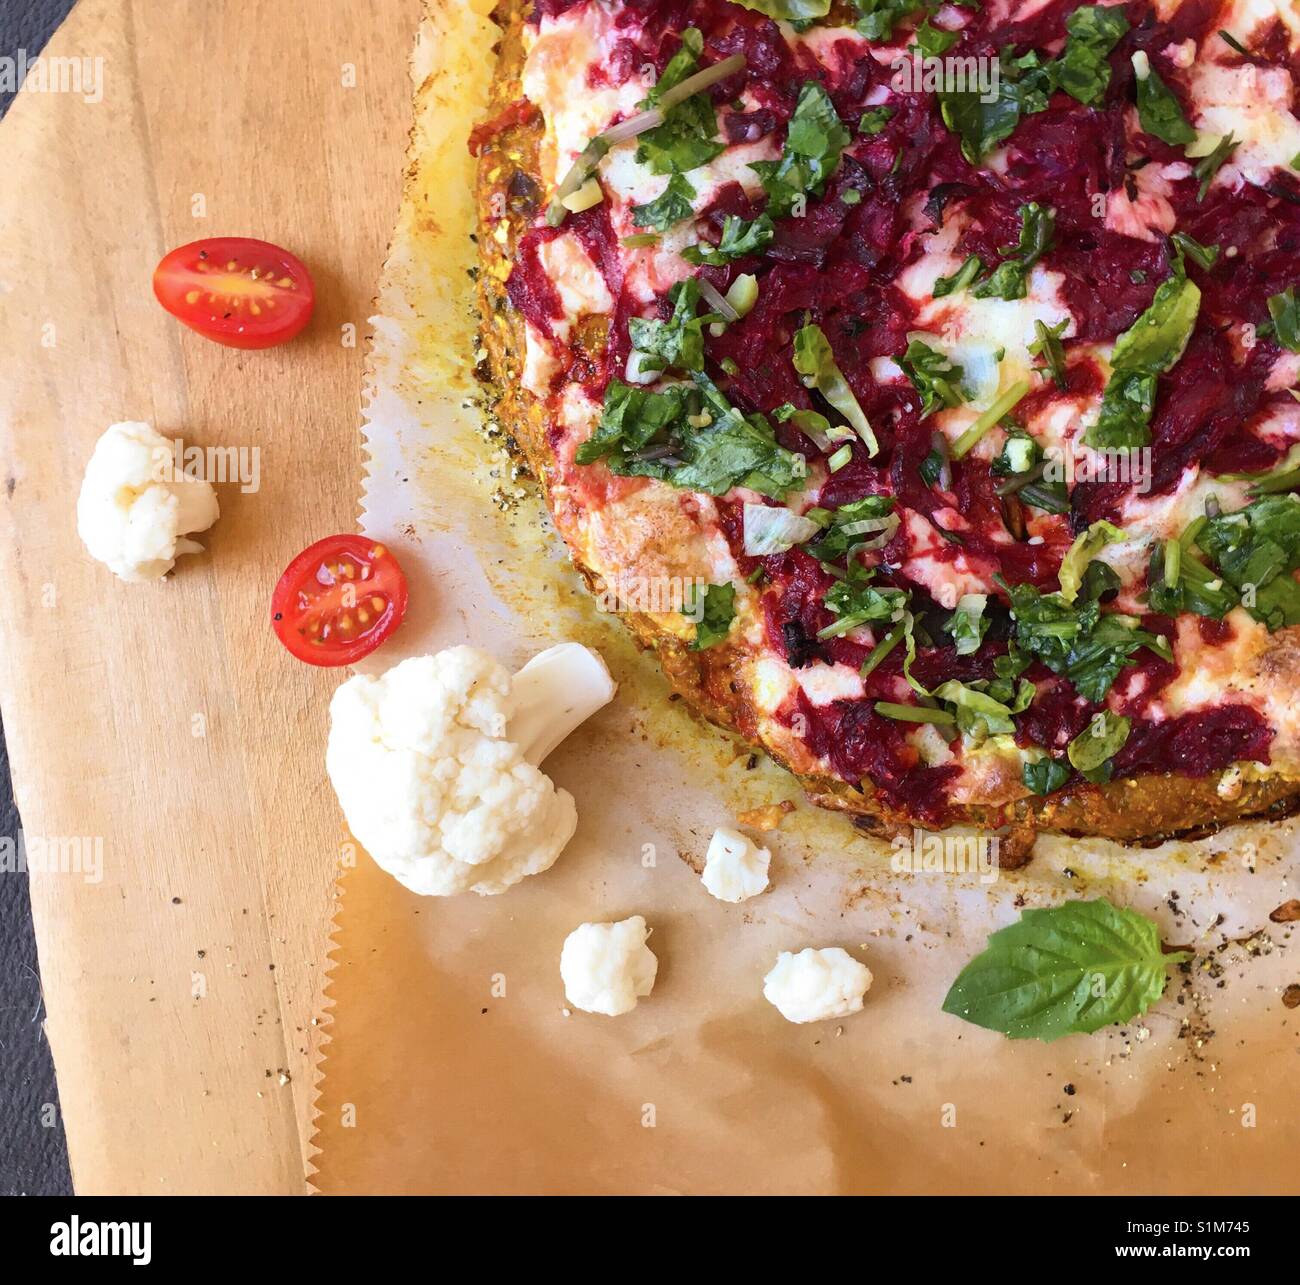 Cauliflower pizza fresh out of the oven Stock Photo